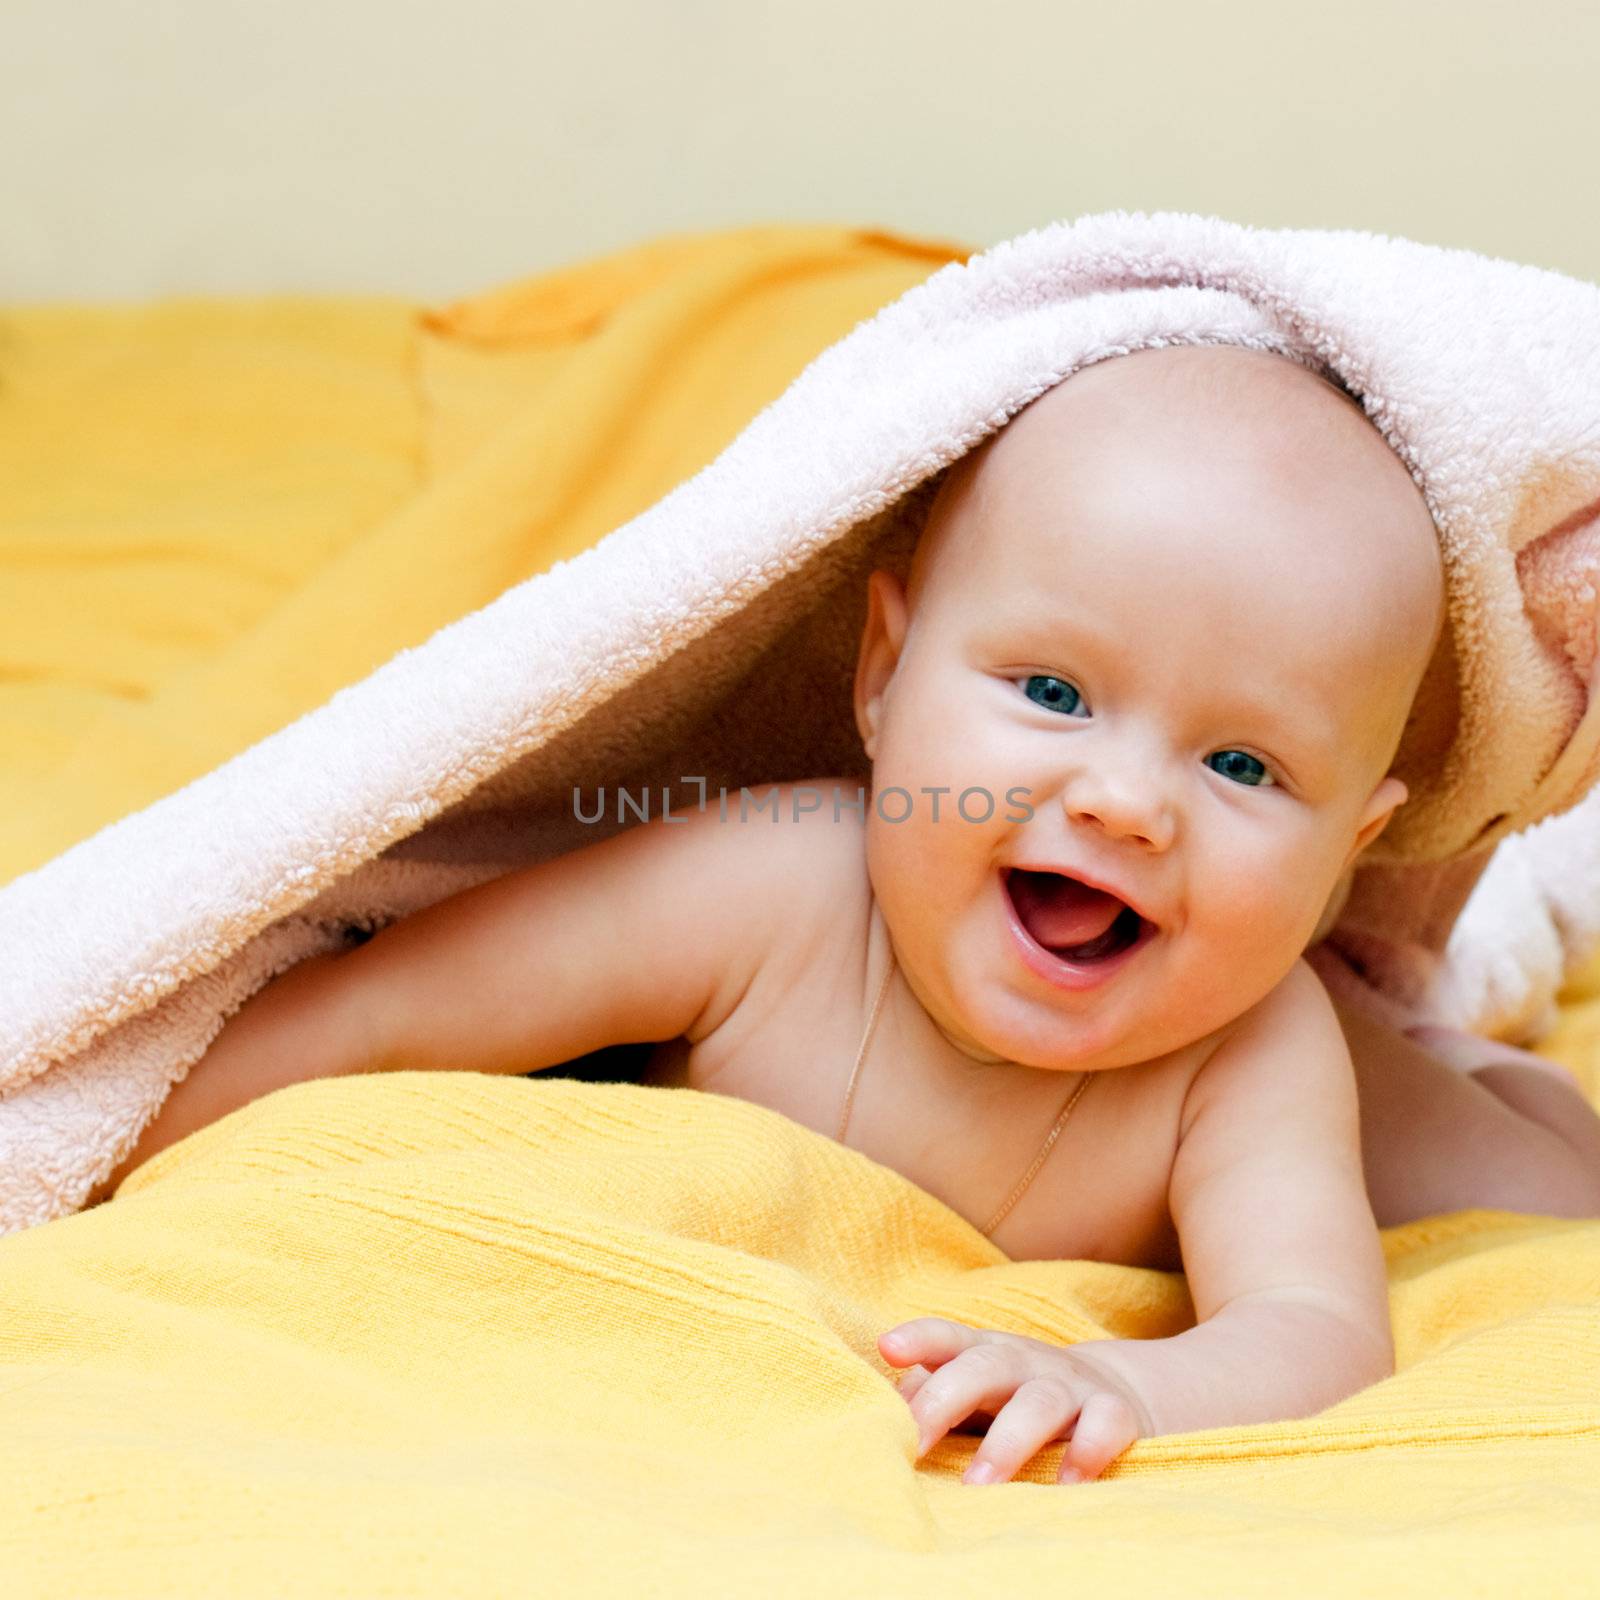 Happy infant by naumoid